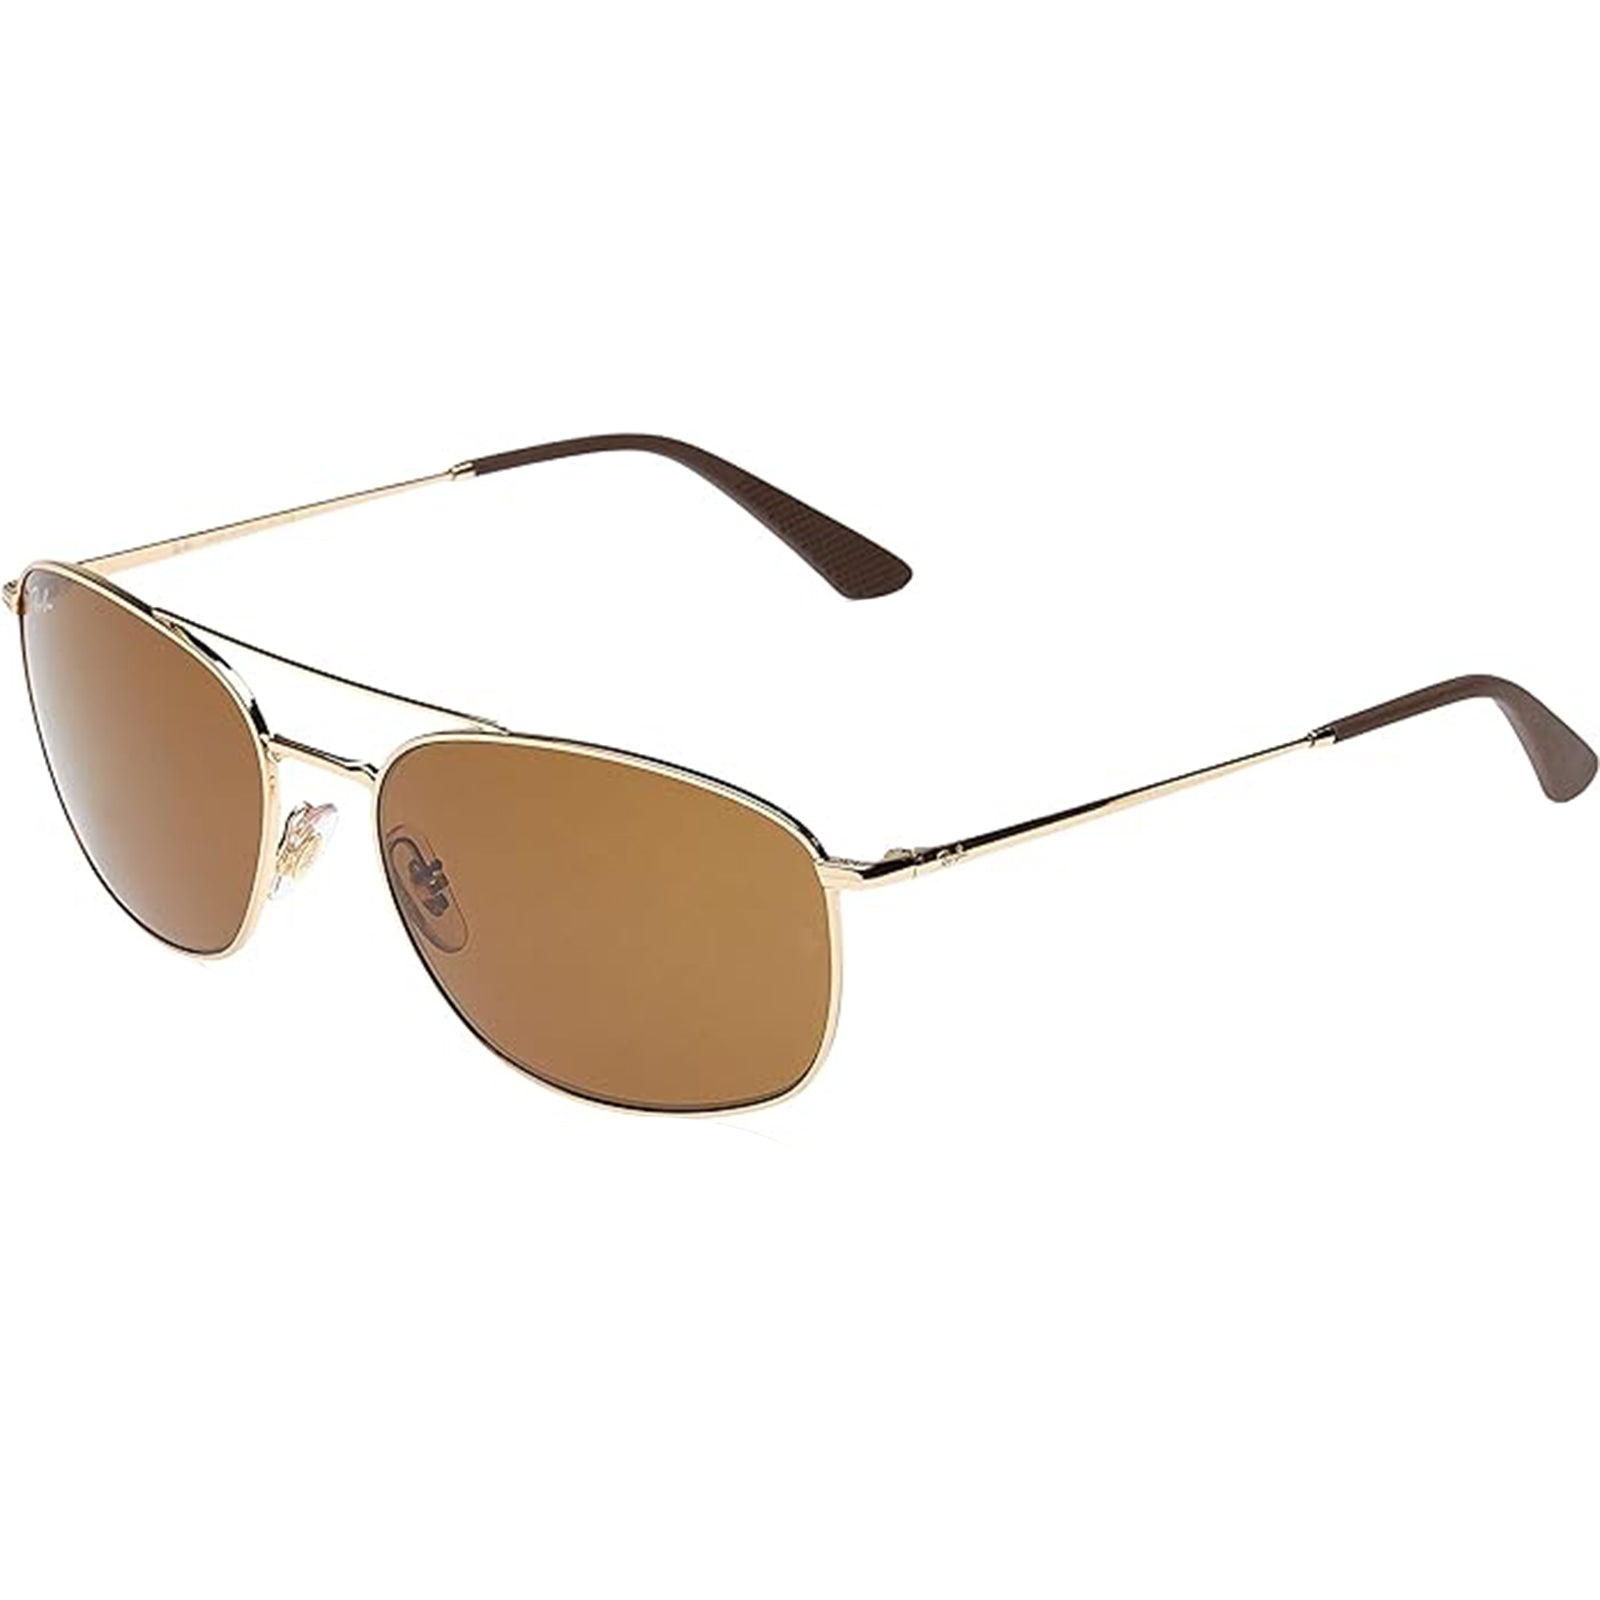 Ray-Ban RB3654 Men's Lifestyle Sunglasses-0RB3654